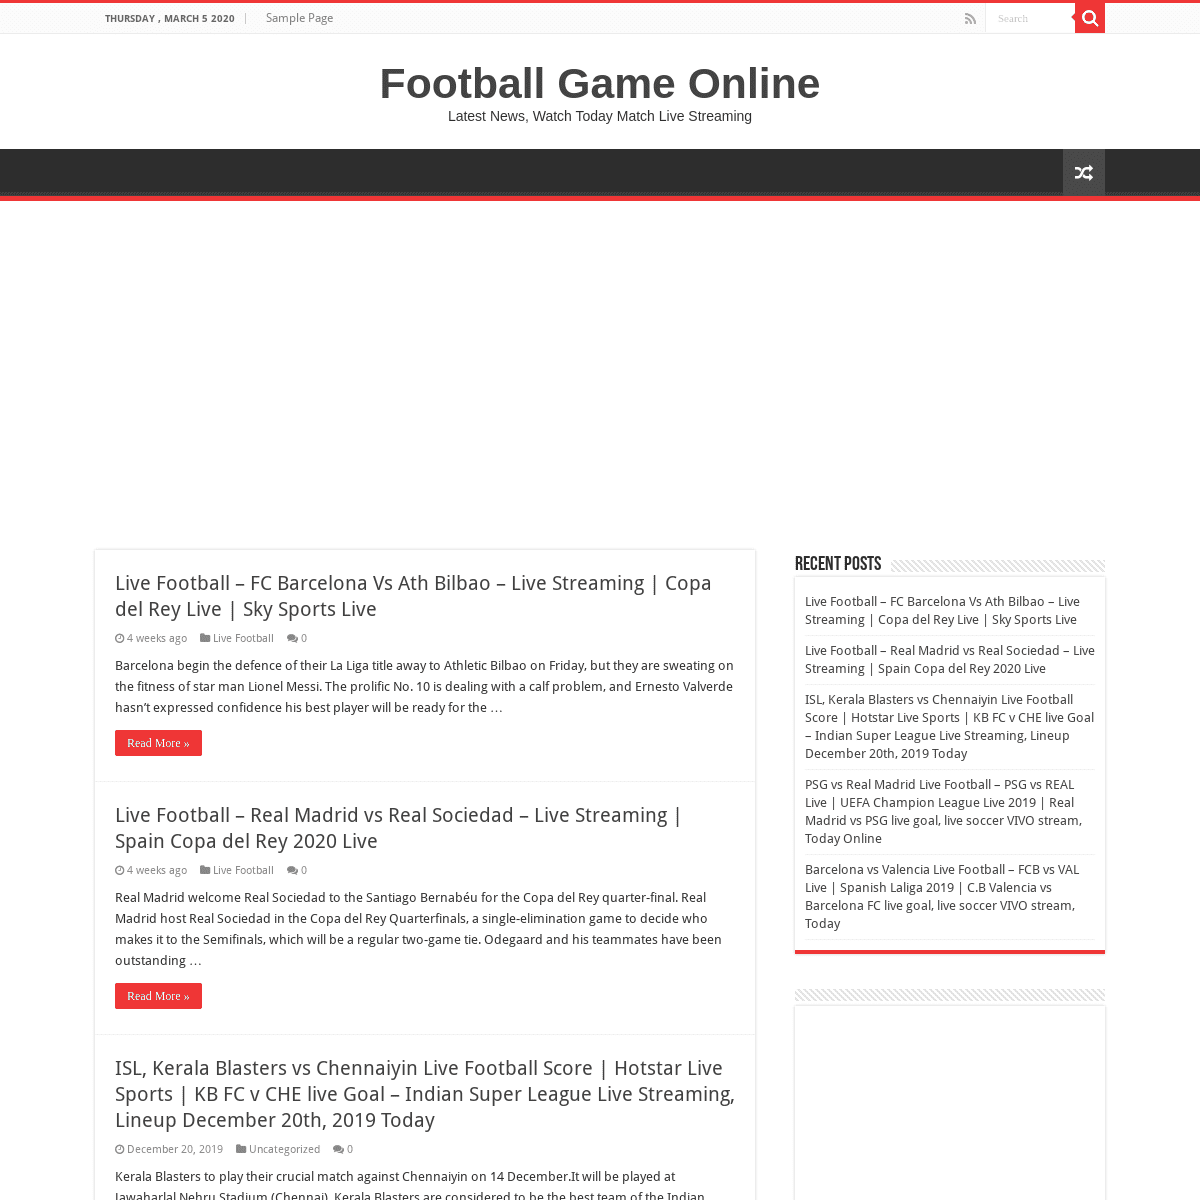 A complete backup of footballgame.site